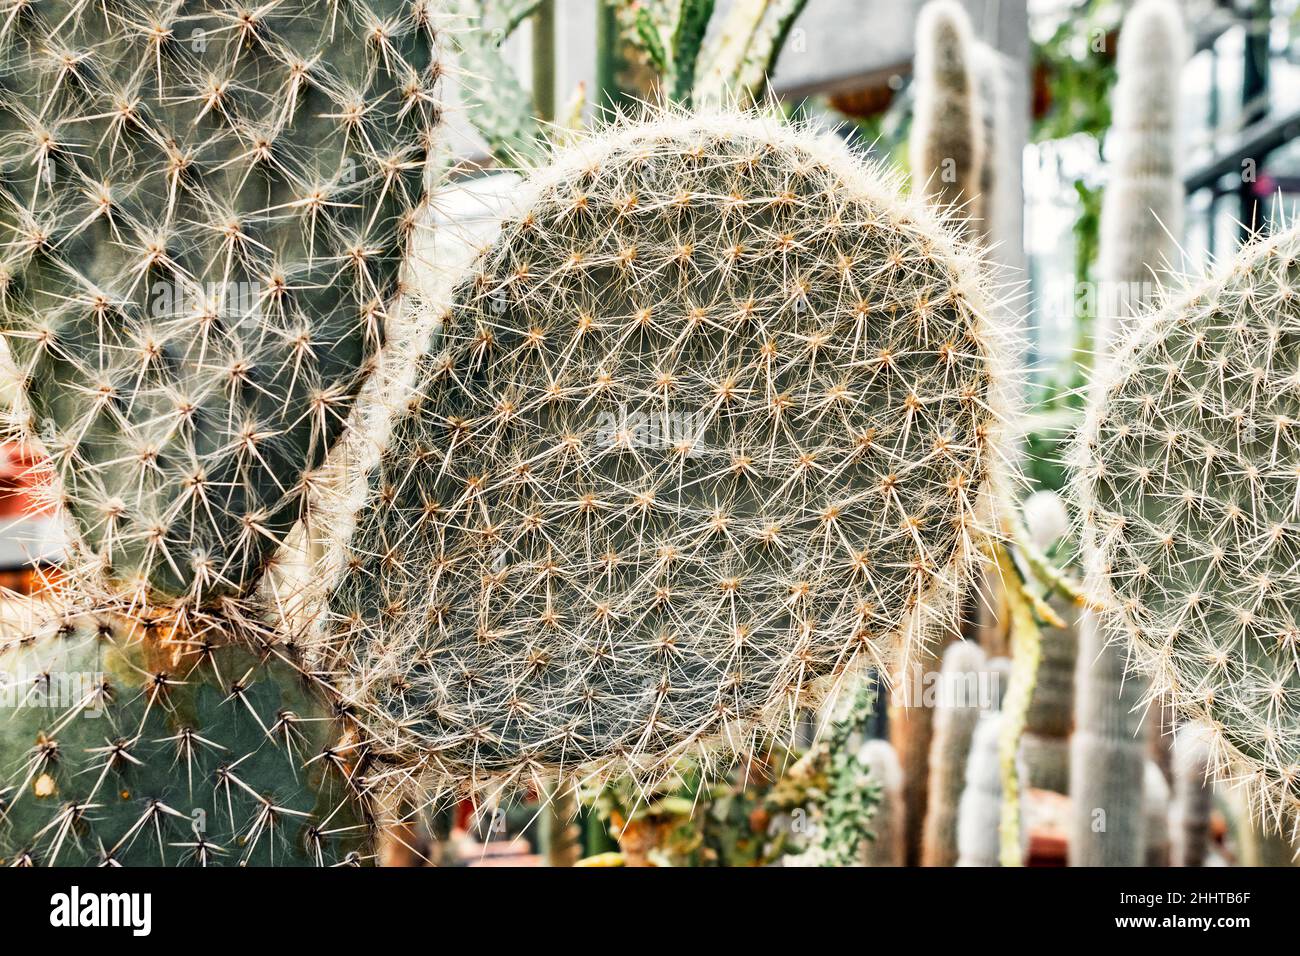 Hairy flat cactus Opuntia or pear cactus n the greenhouse, close-up Stock Photo